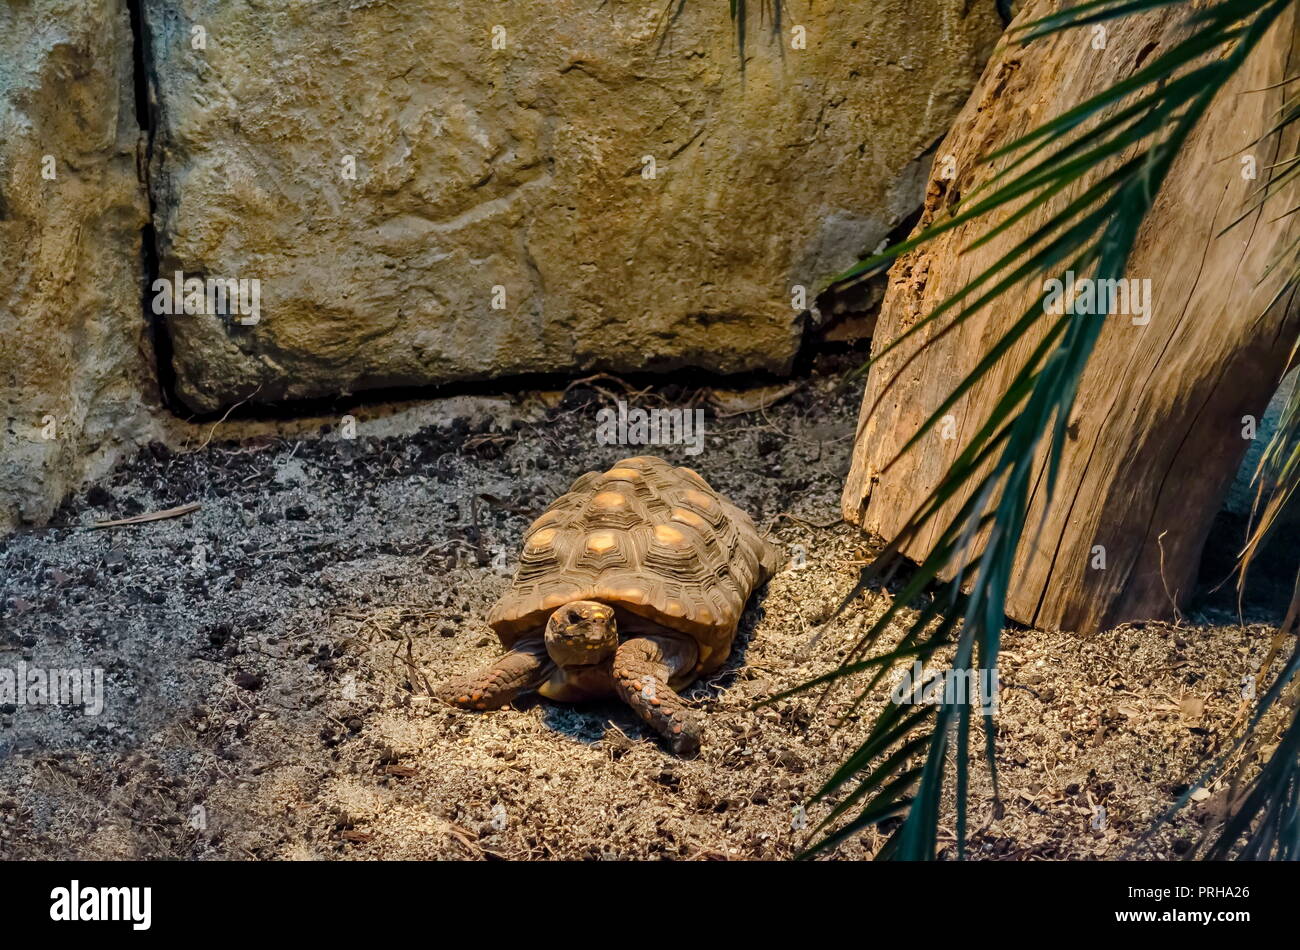 View of patience Tortoise crawling in the nature, Sofia, Bulgaria Stock Photo